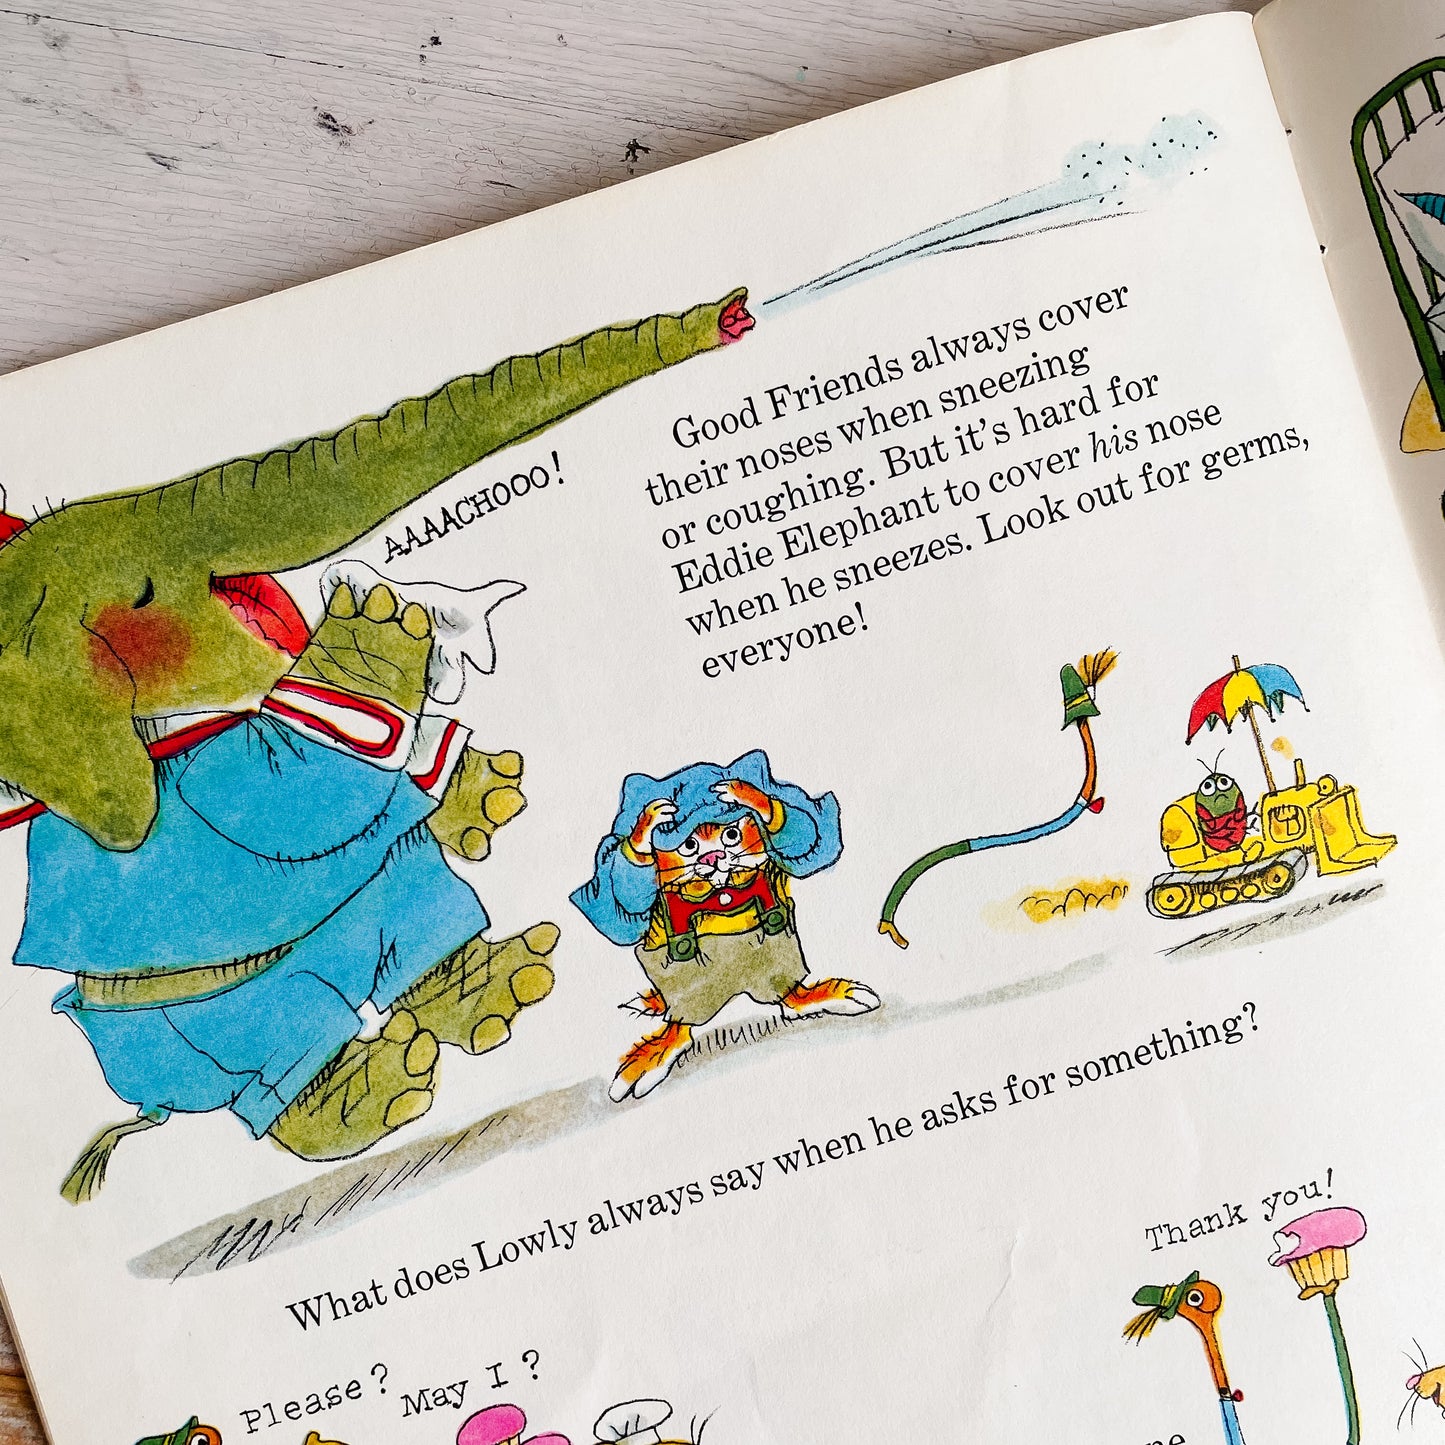 Richard Scarry's Please and Thank You Book Softcover (1973)